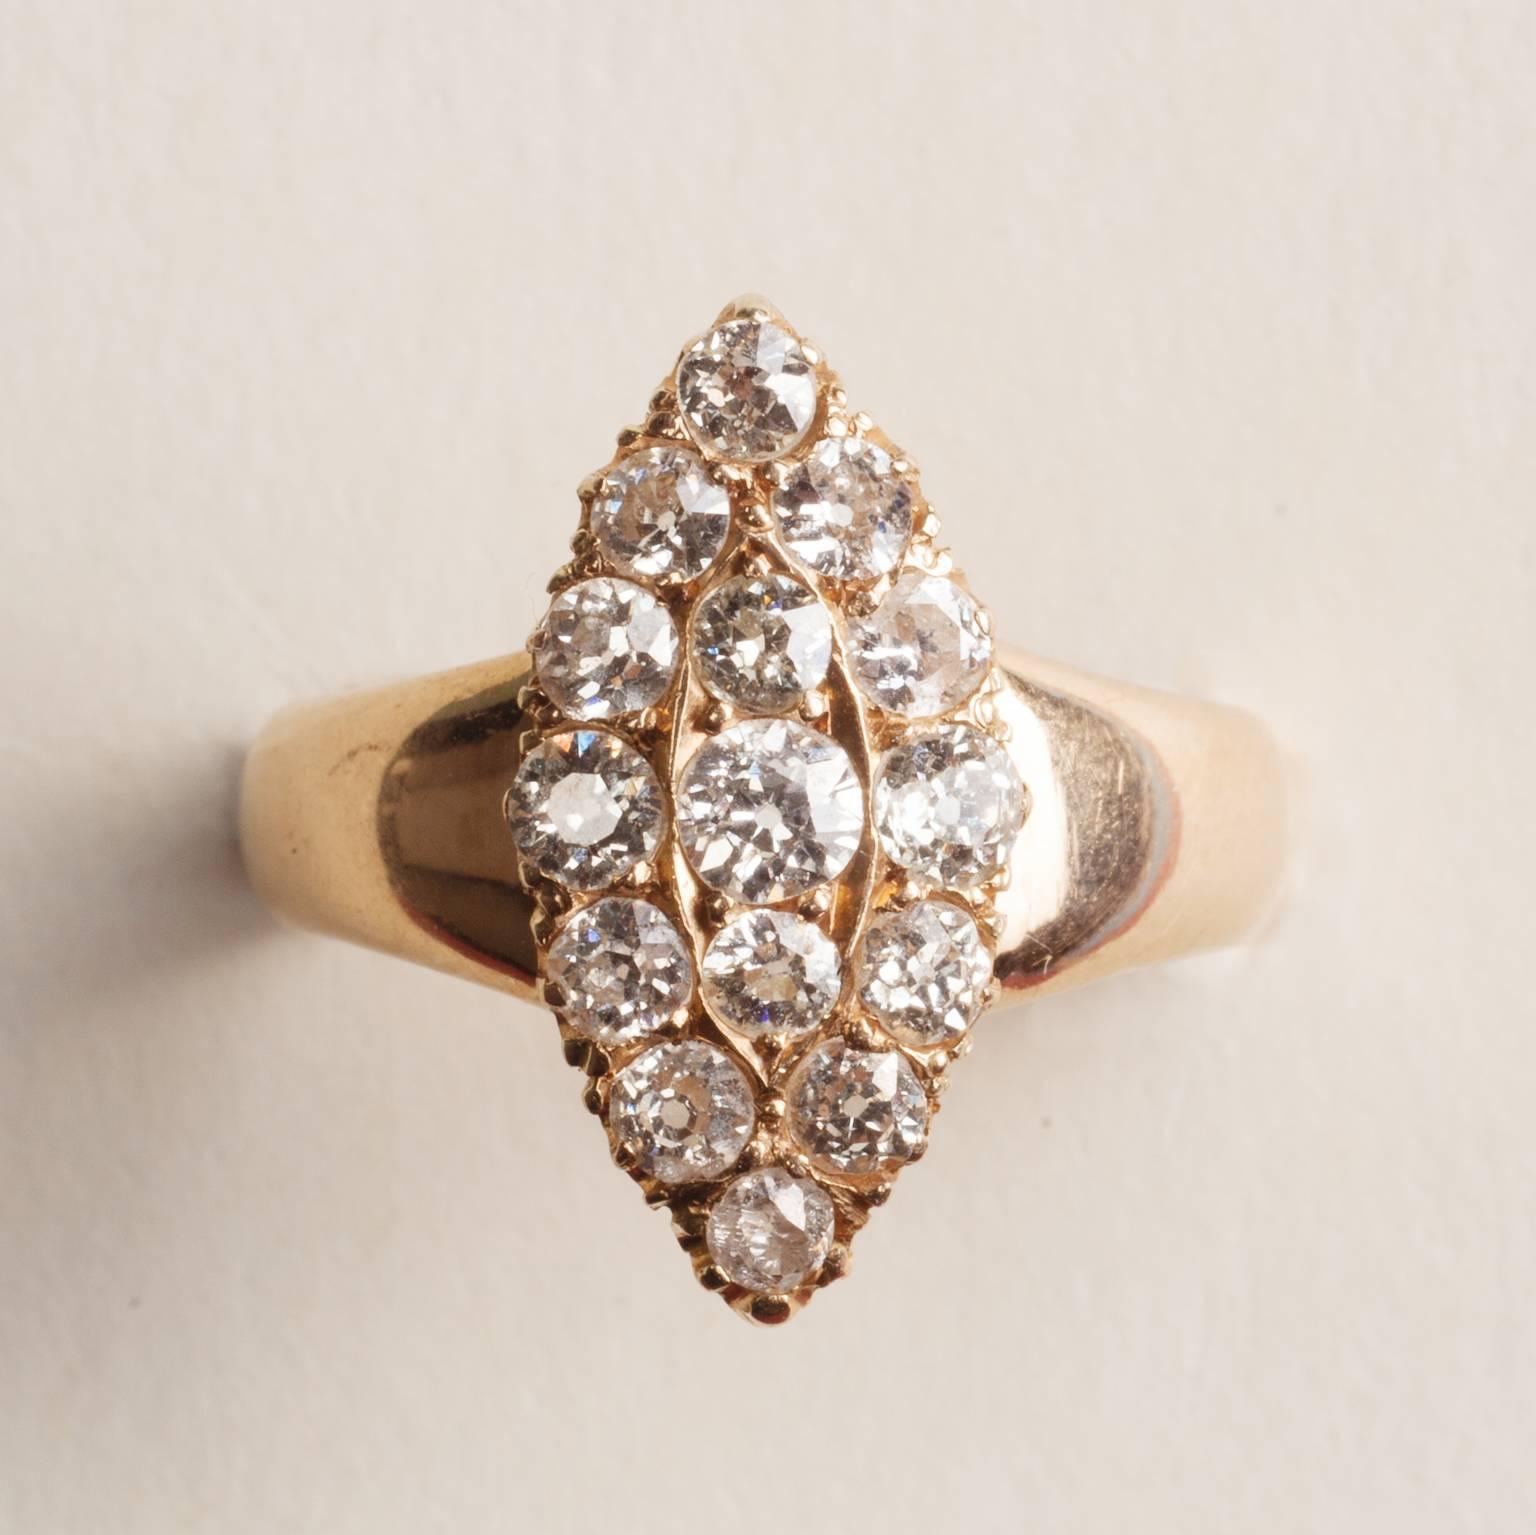 An 18 carat gold marquise shaped ring set with 15 old cut diamonds (app. 0.8 carats), 19th century.

weight: 4.4 gram
ring size: 16.75 mm. 6 1/4 US.